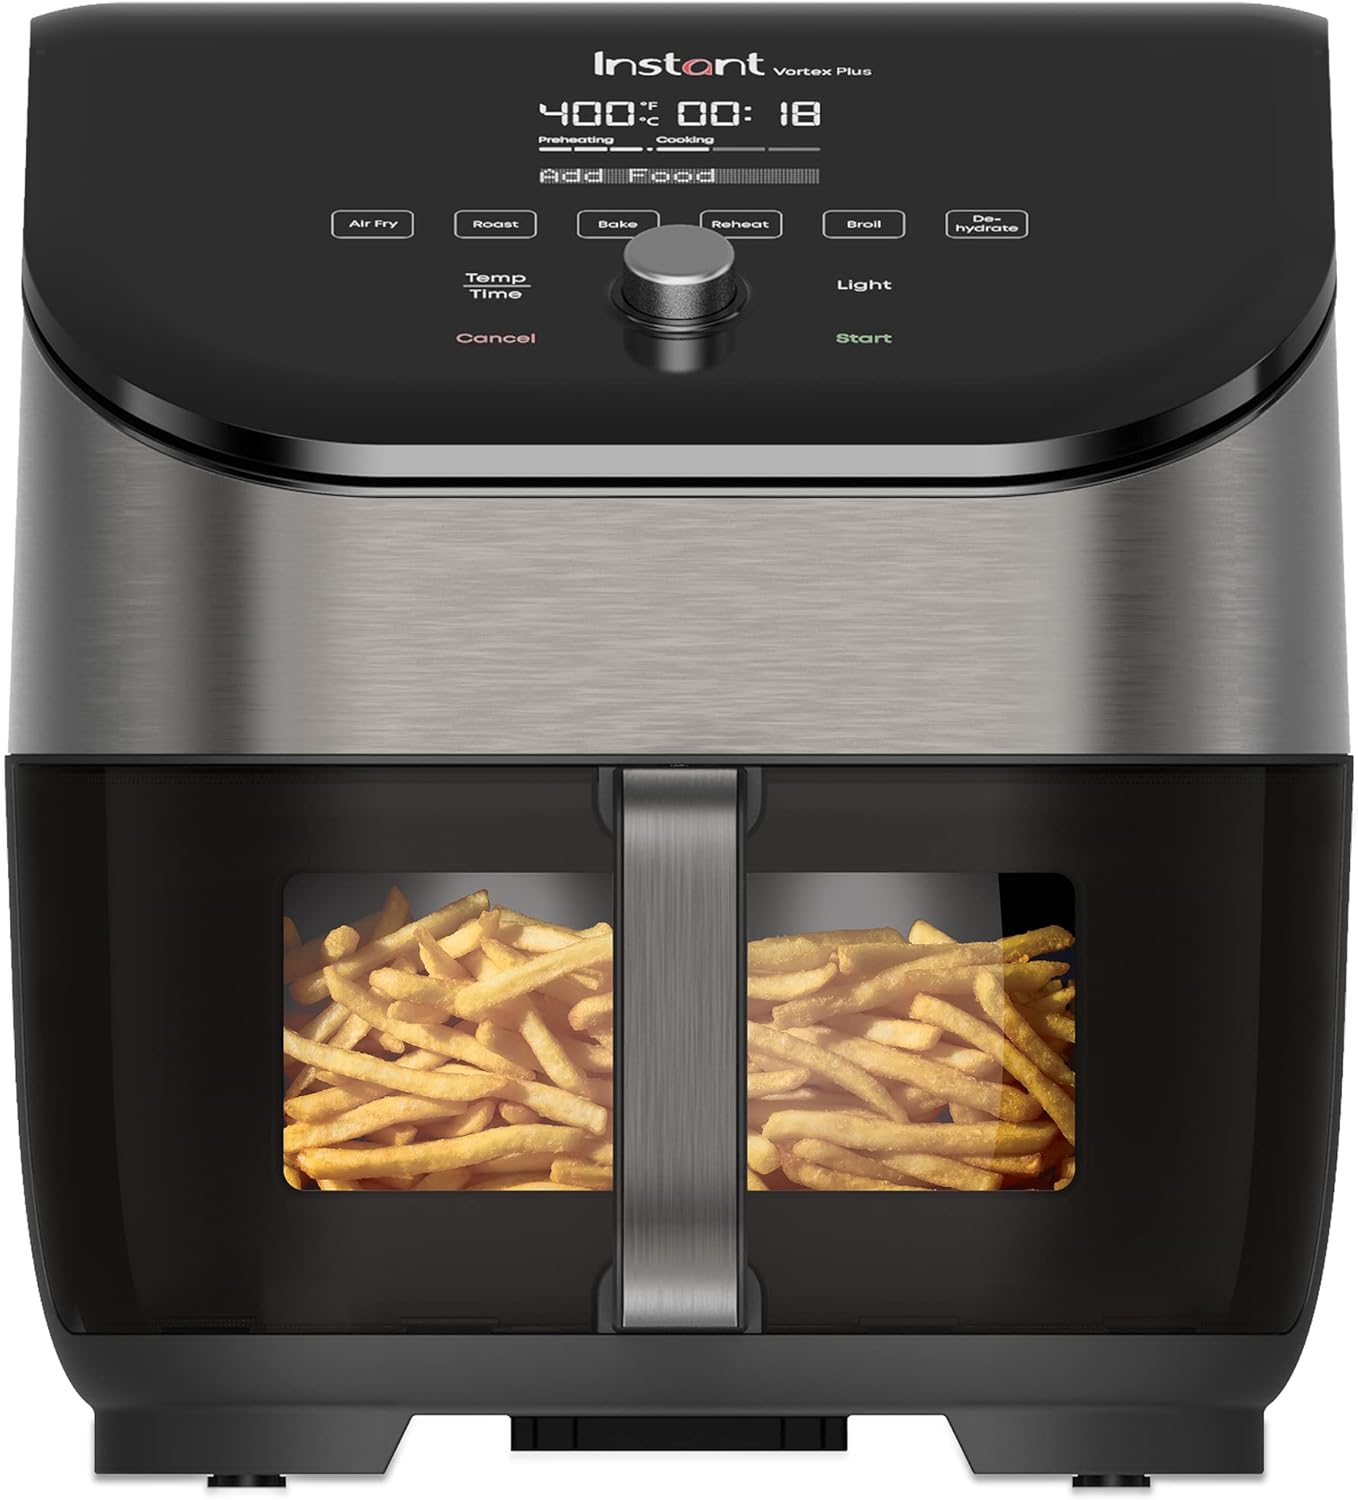 Instant Vortex Plus 6QT Air Fryer with Odor Erase Technology, 6-in-1 Functions that Crisps, Roasts, Broils, Dehydrates, Bakes & Reheats, 100+ In-App Recipes, from the Makers of Instant Pot, Black